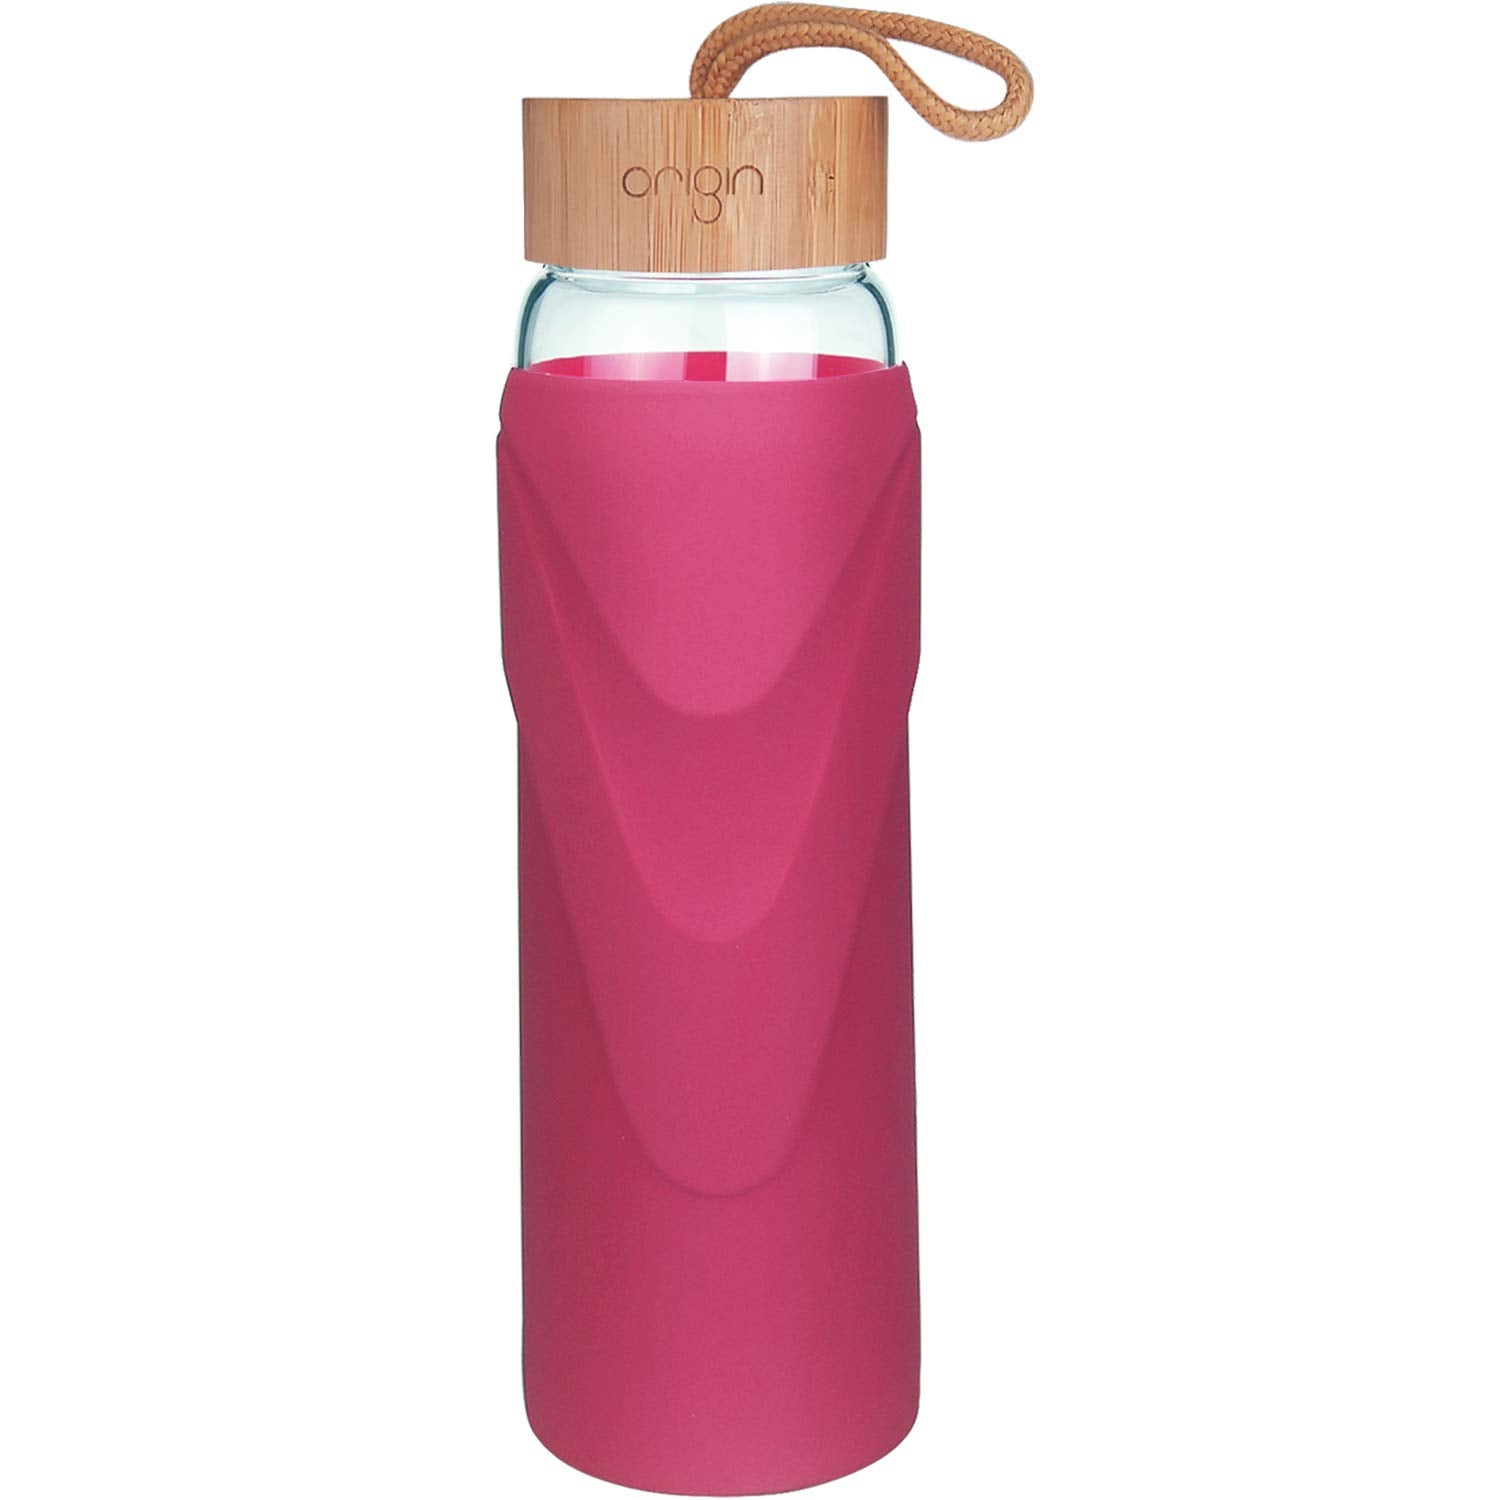 Botanical 20 Oz Glass Water Bottle with Bamboo Lid Google Cloud